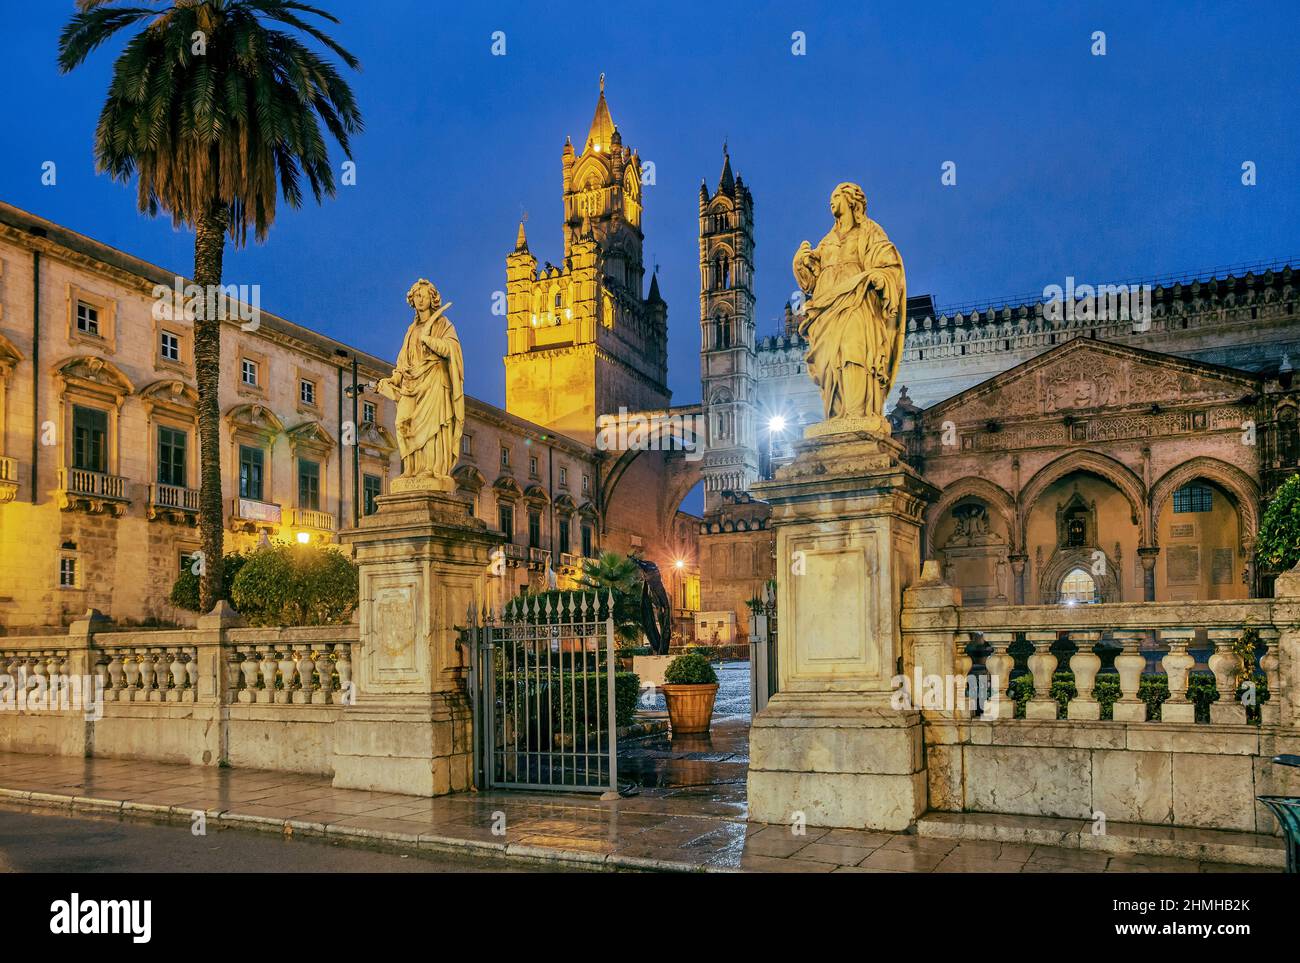 Cathedral on Via Vittorio Emanuele in the old town at night, Palermo, Sicily, Italy Stock Photo